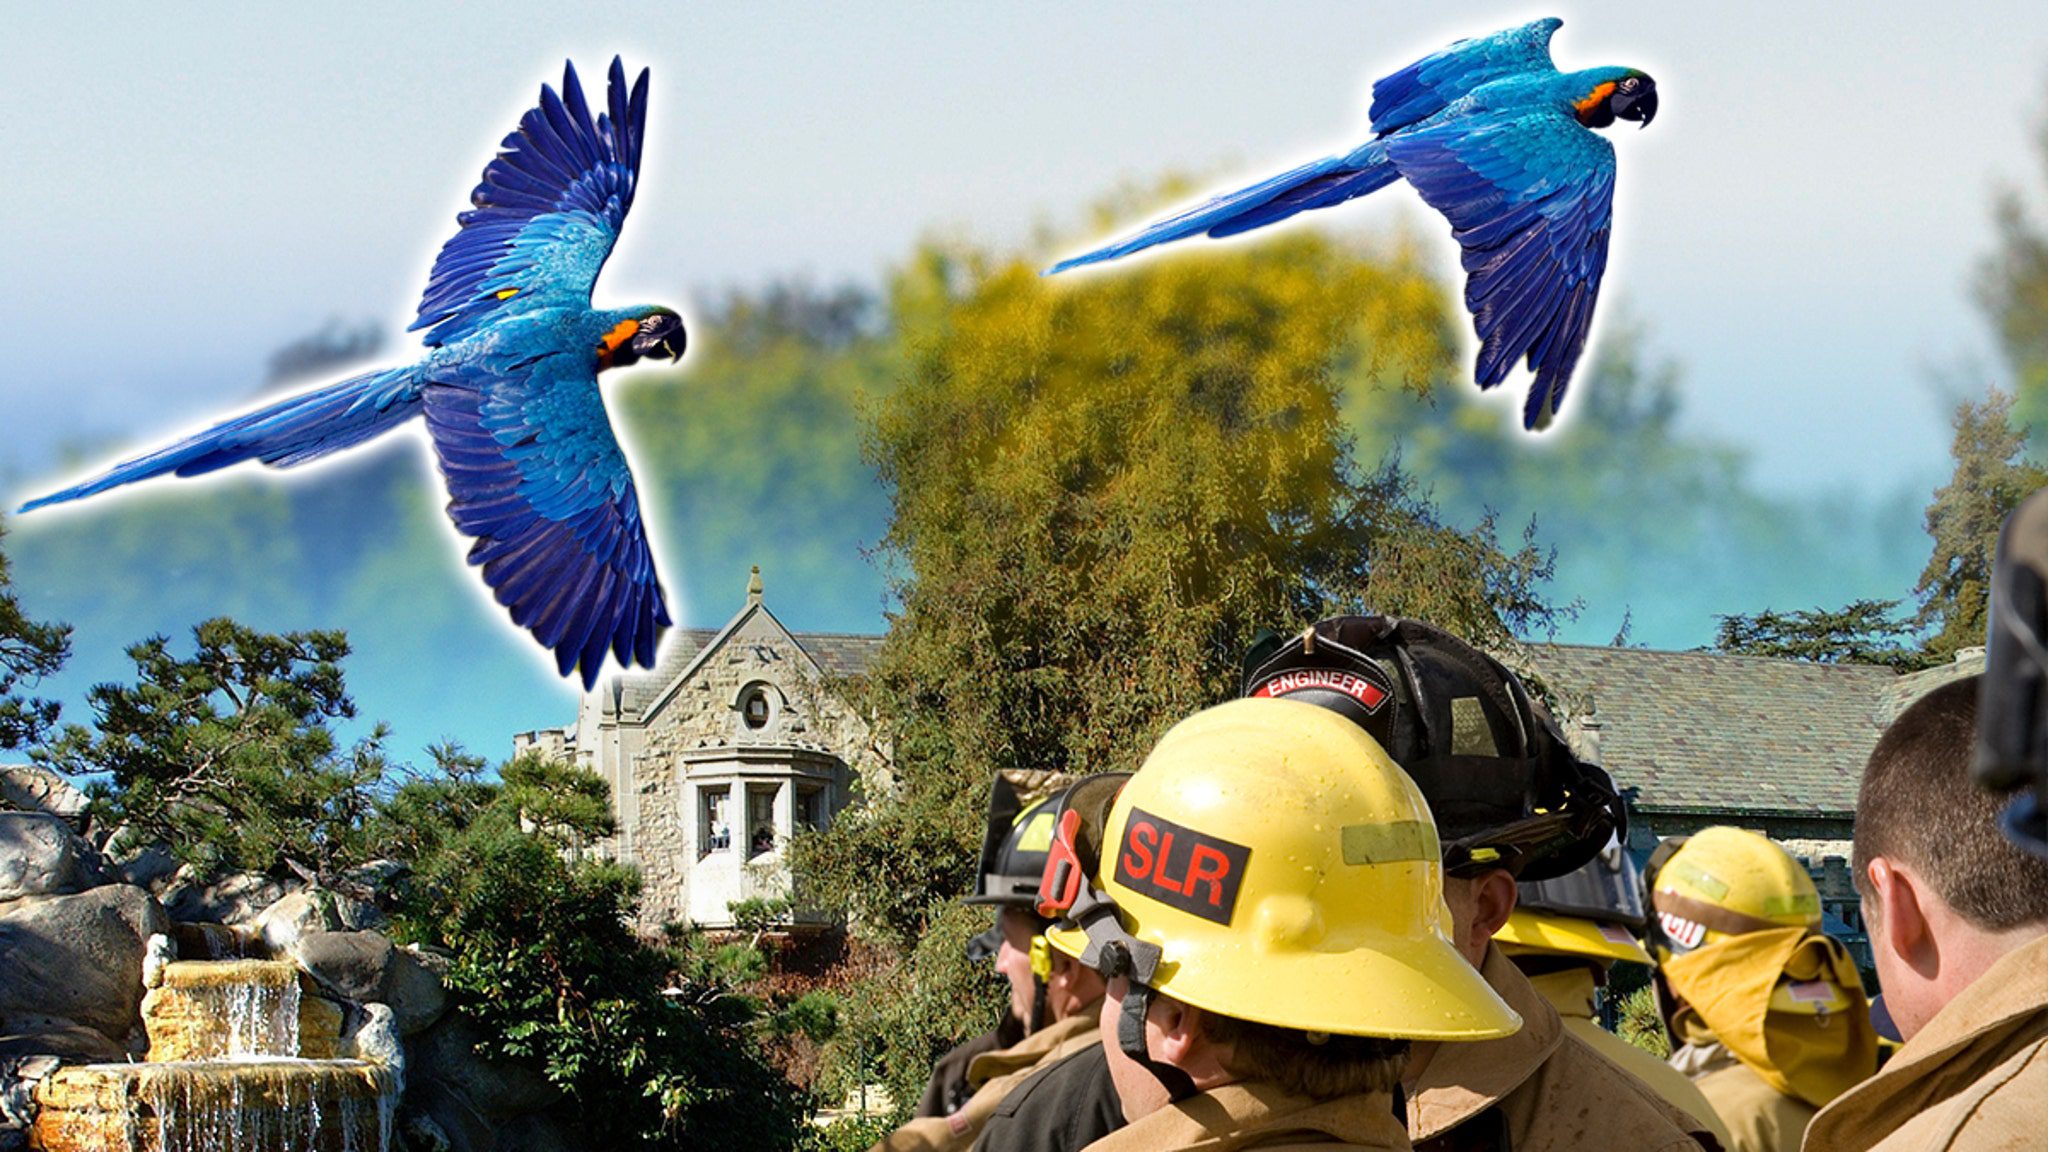 Playboy Mansion's Feisty Parrot Escapes: A Riotous Spectrum of Freedom Soaring High!